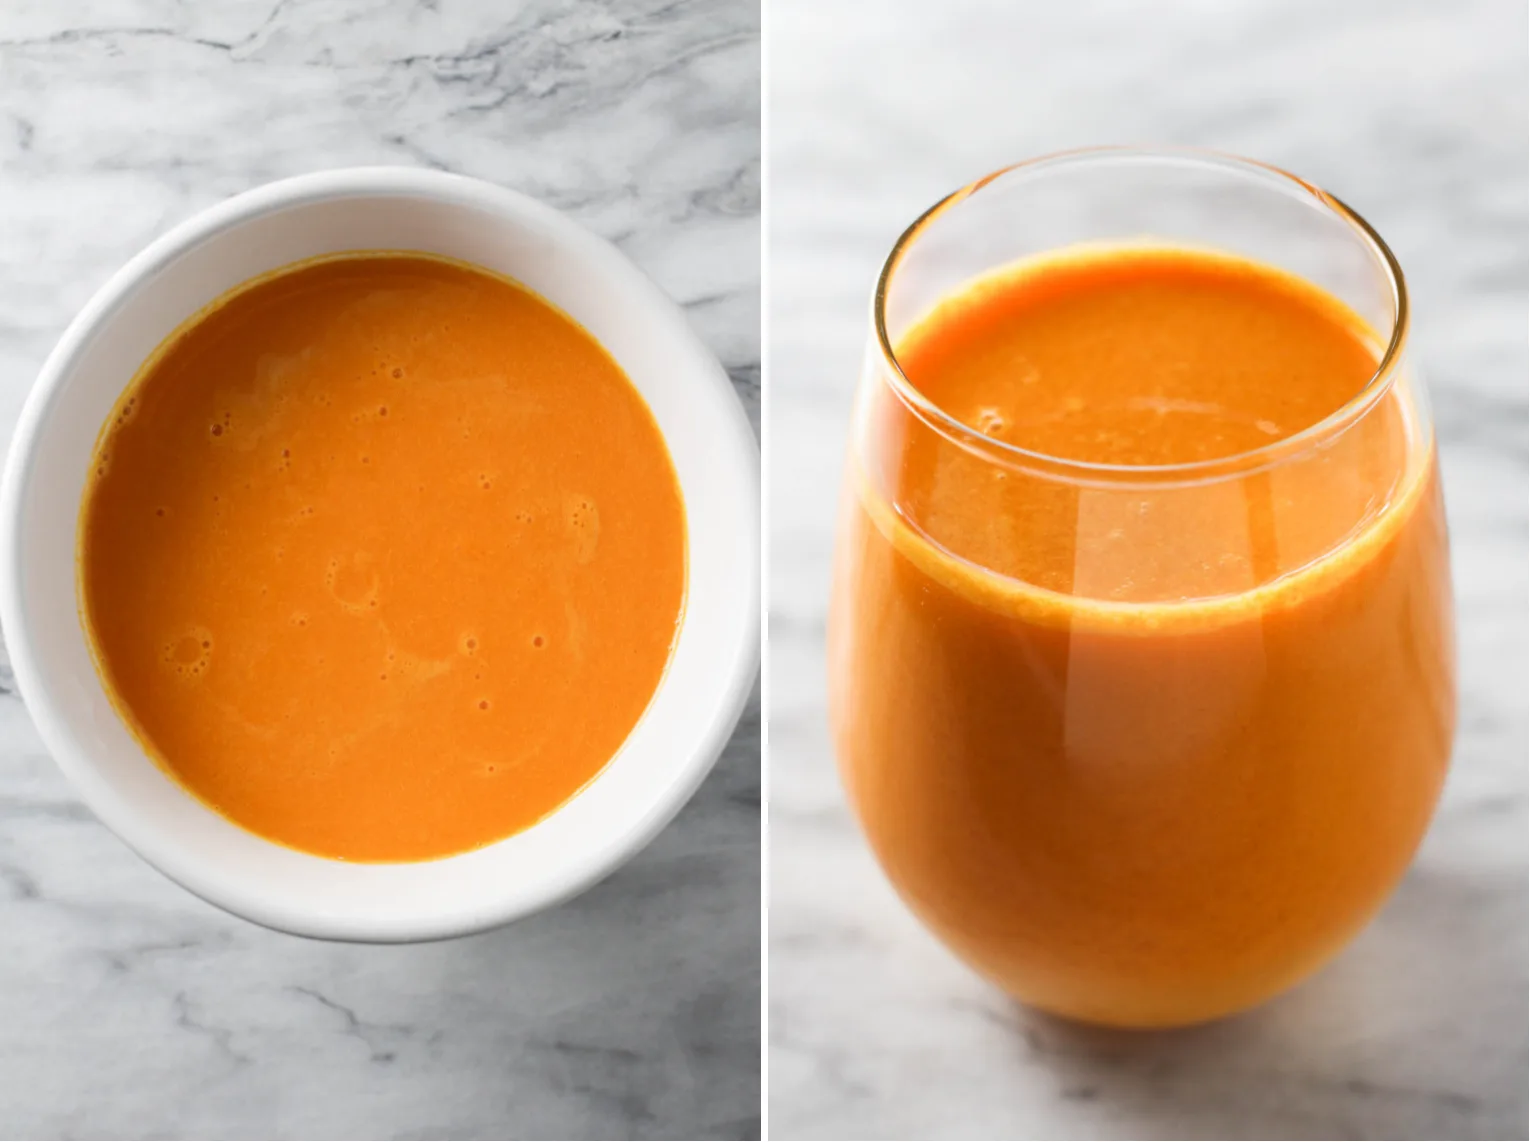 Two side-by-side images. On the left image, sea buckthorn juice in a white bowl. On the right image, sea buckthorn juice in a glass.